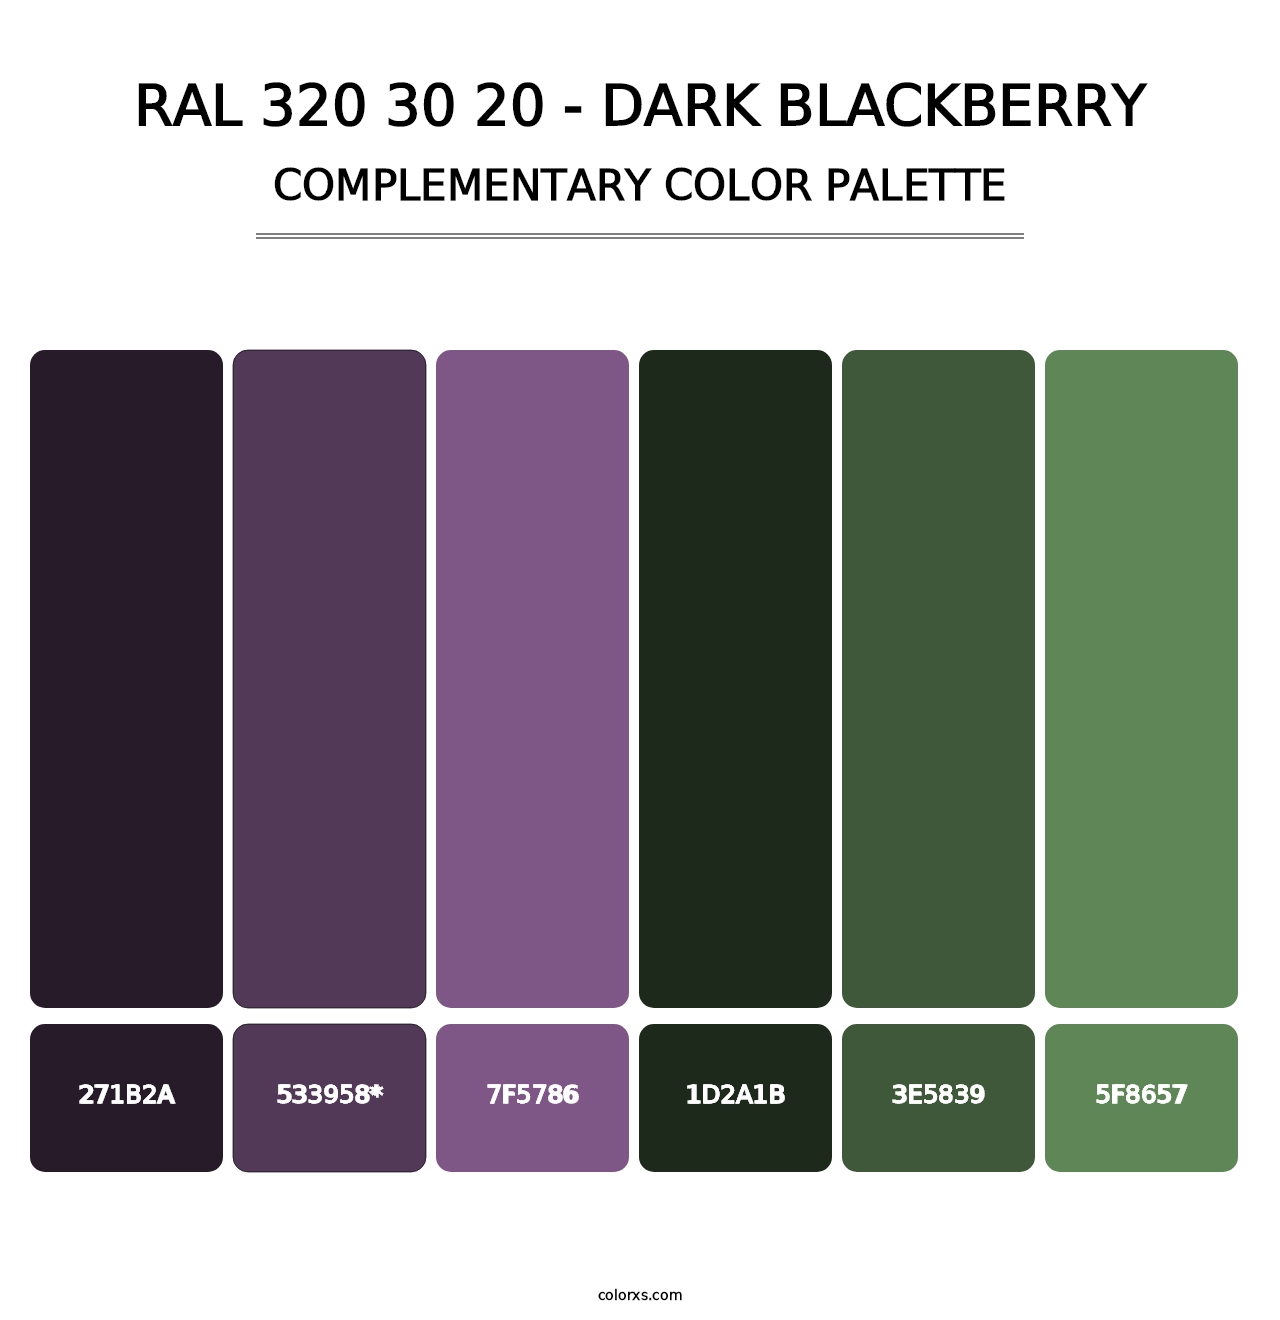 RAL 320 30 20 - Dark Blackberry - Complementary Color Palette